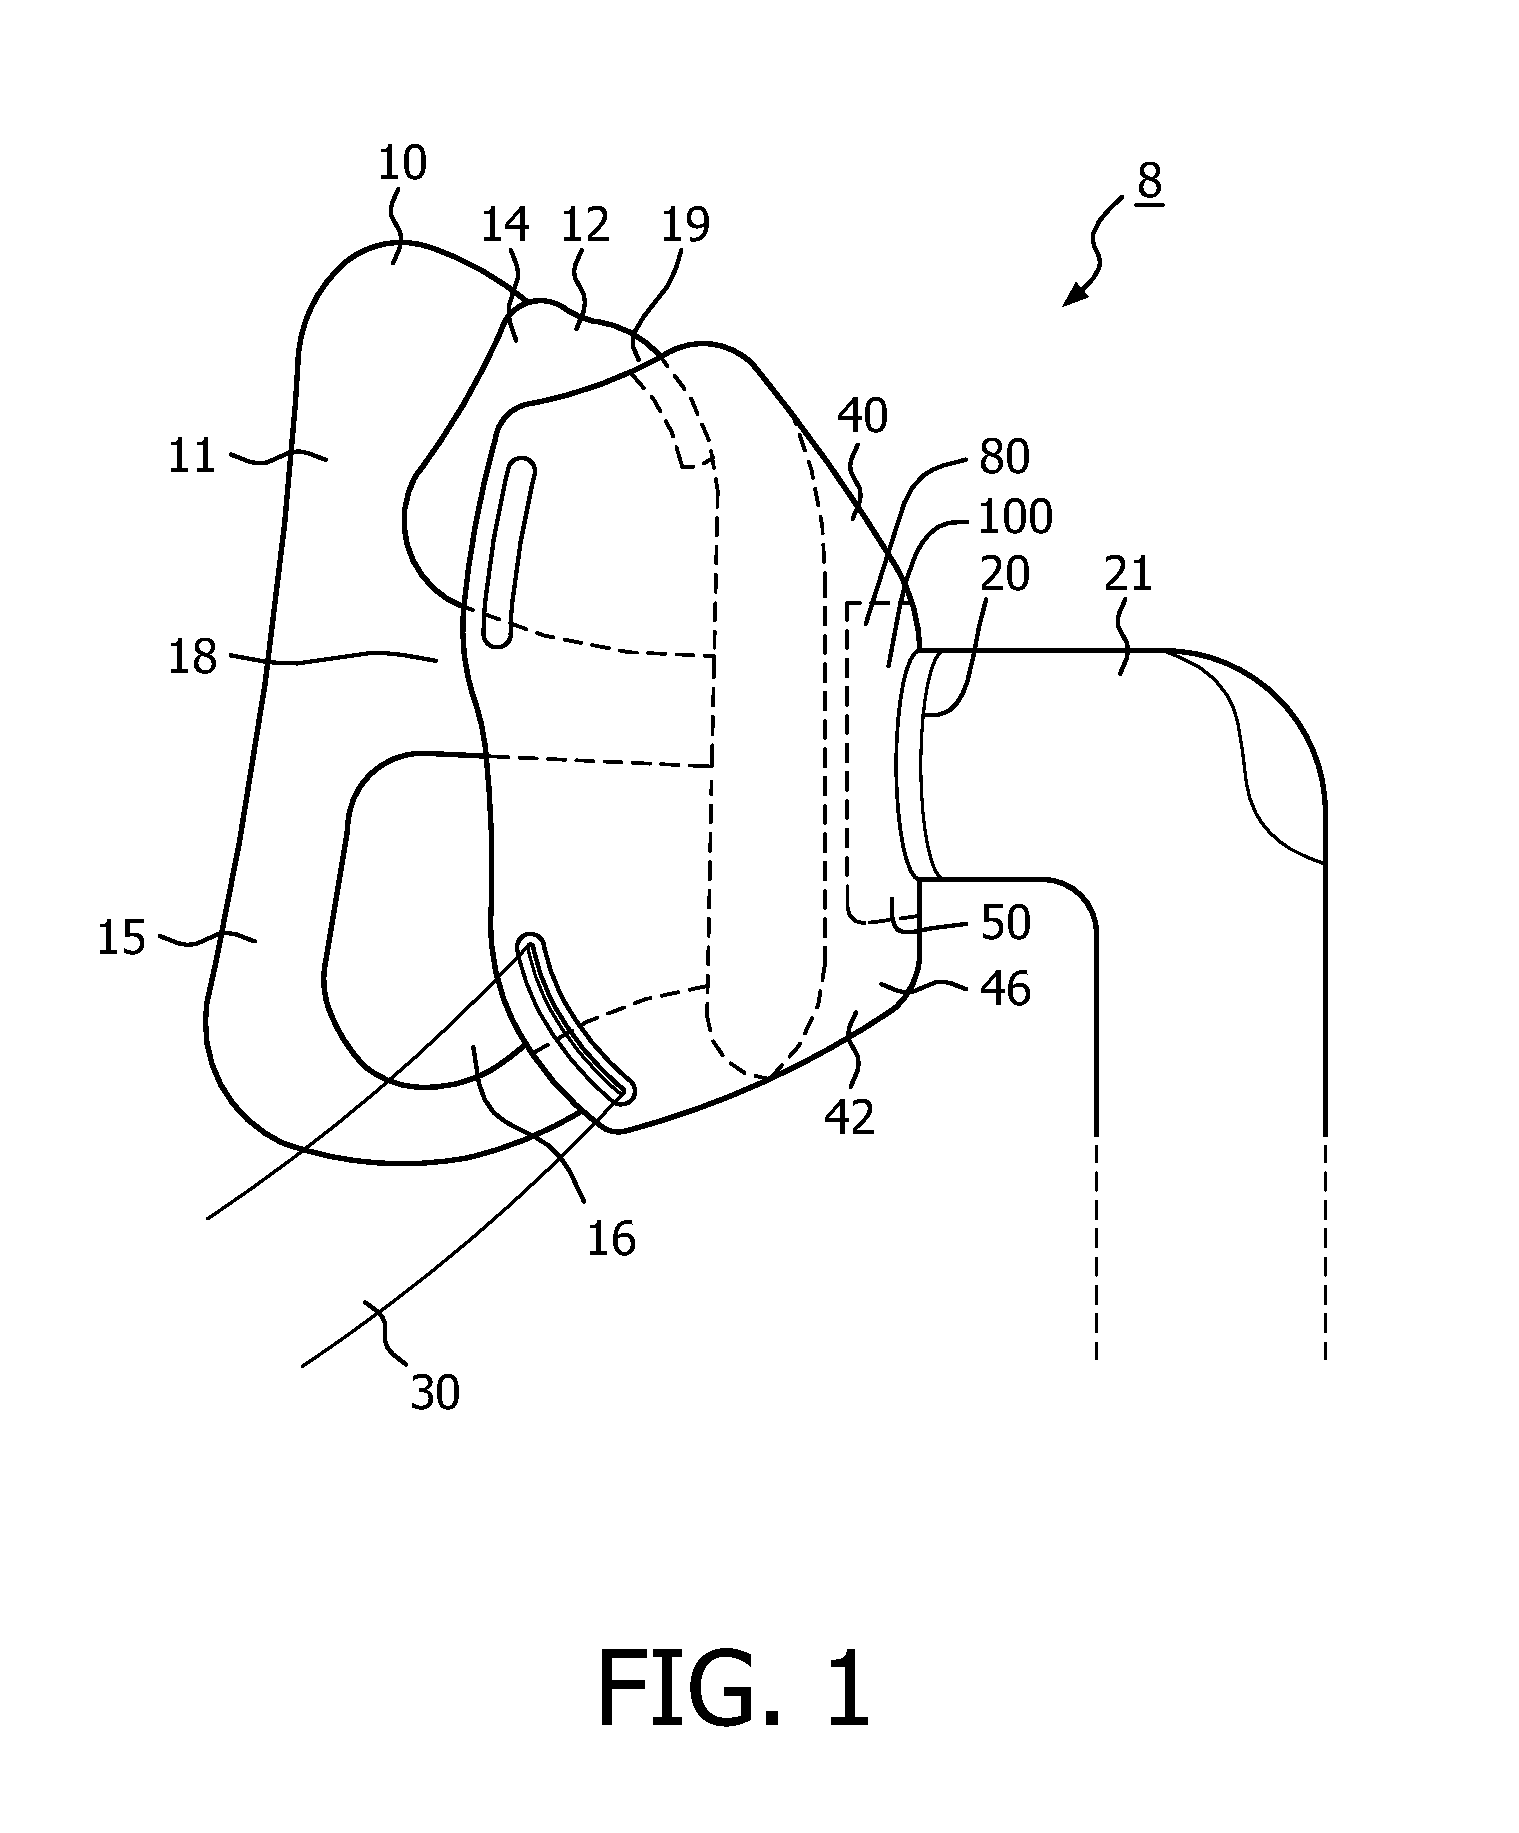 Auto-adjusting membrane for respiratory interface device